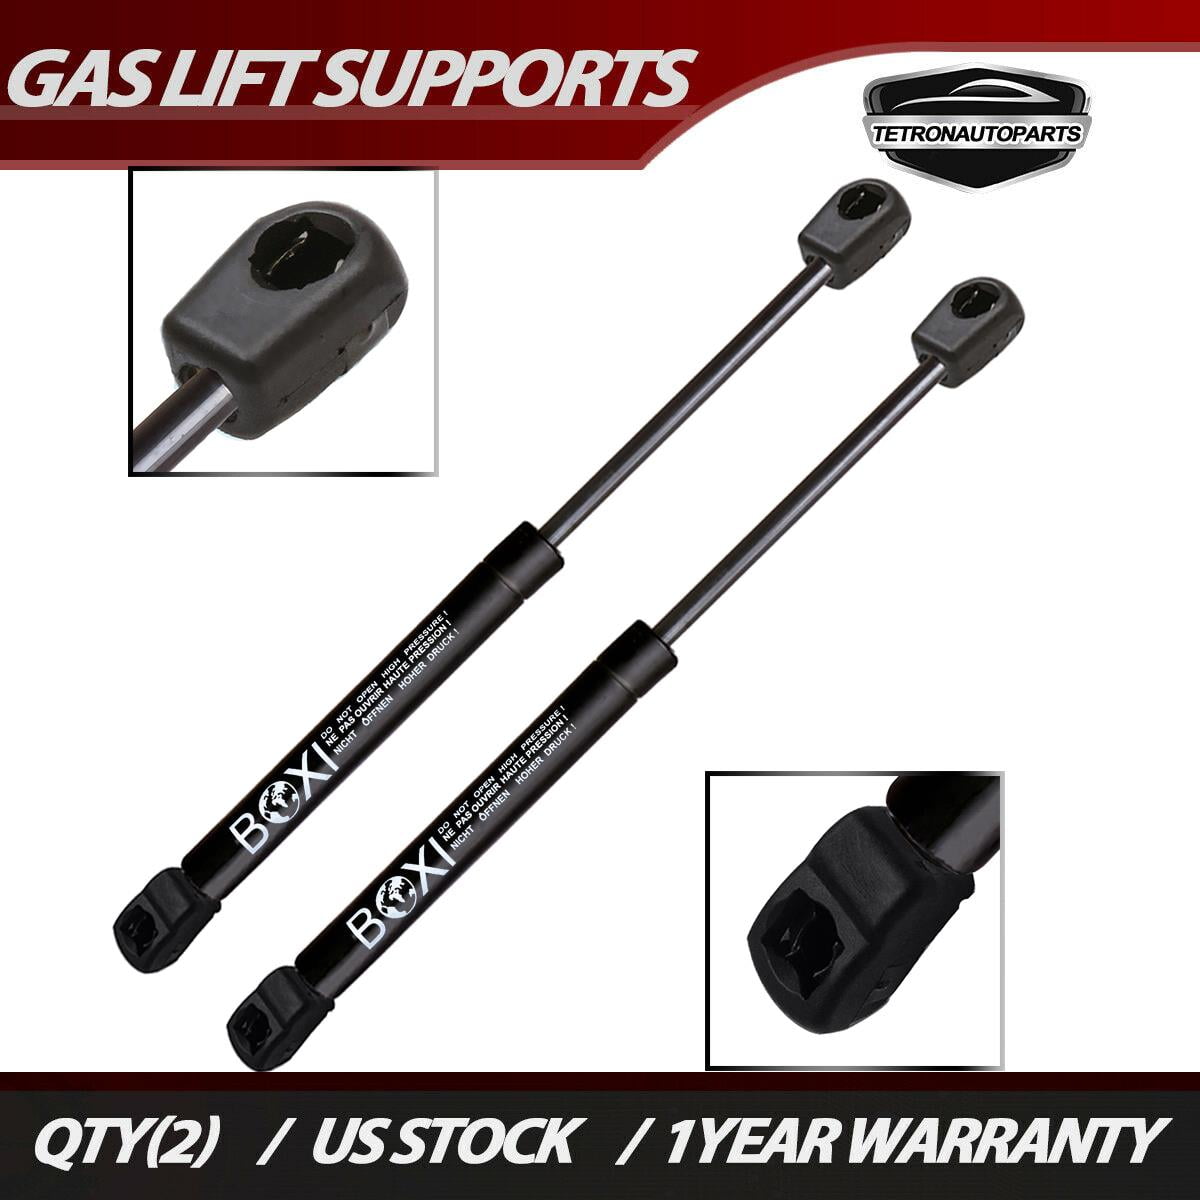 2 pc Strong Arm Liftgate Lift Supports for Dodge Grand Caravan 2008-2015 tb 